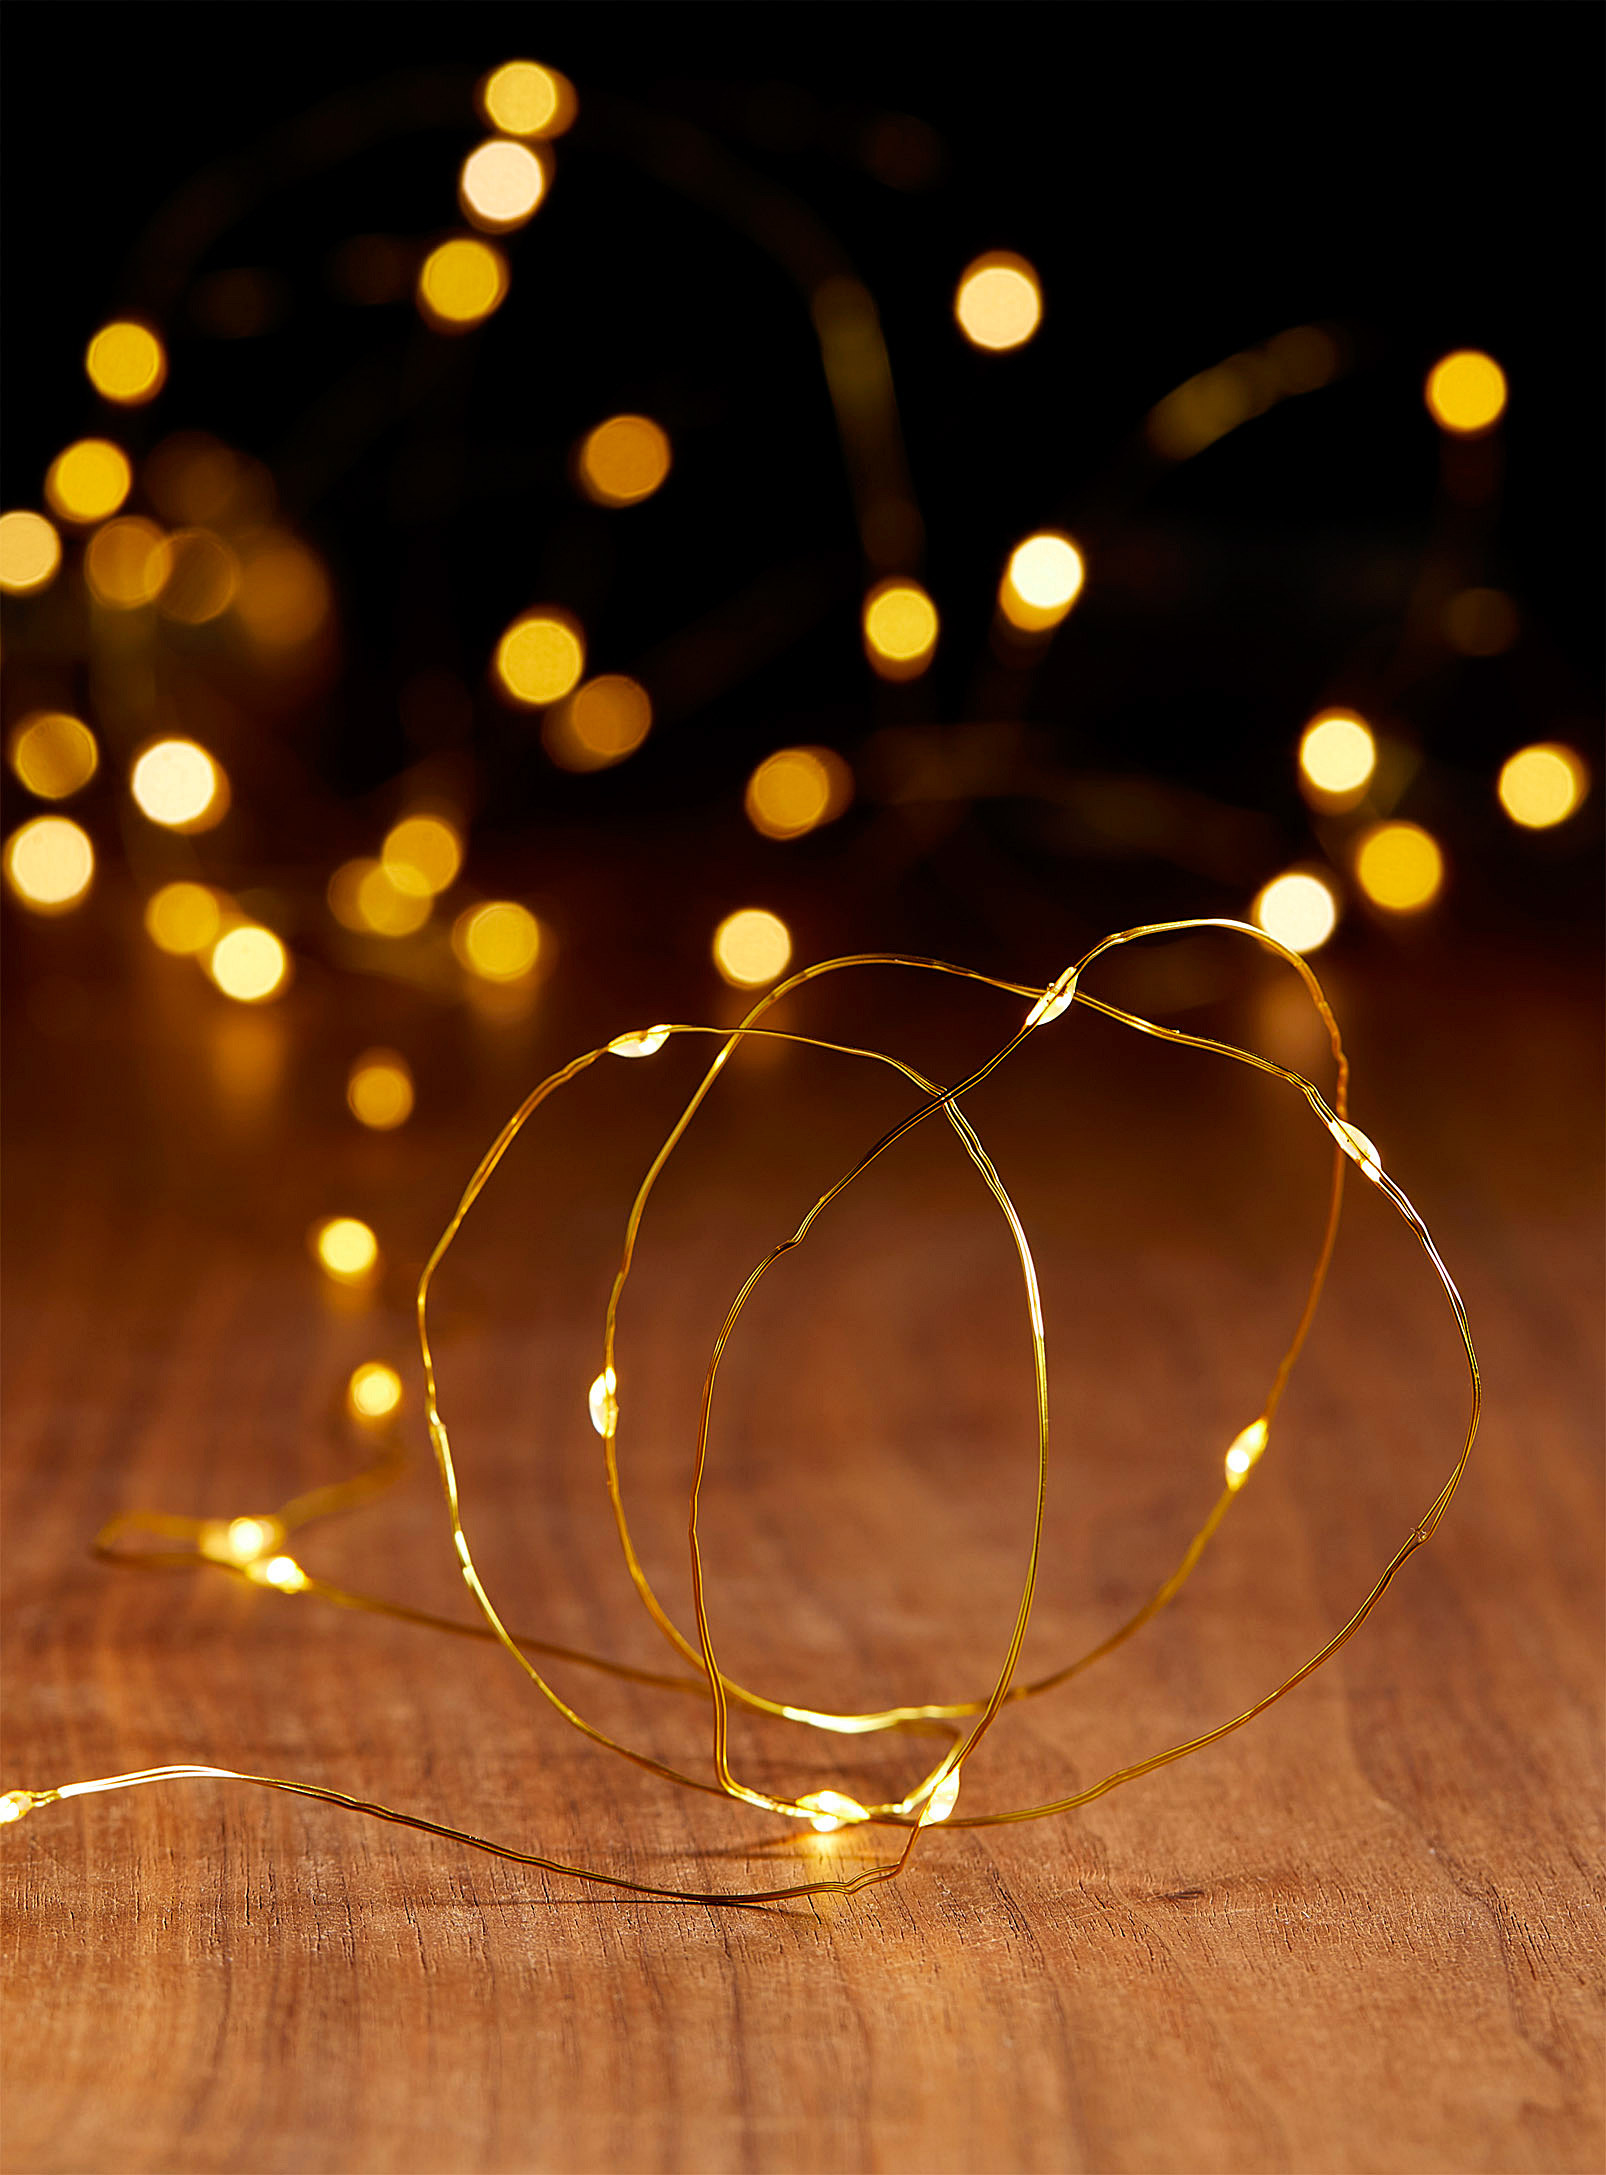 A string of fairy lights on a wooden floor